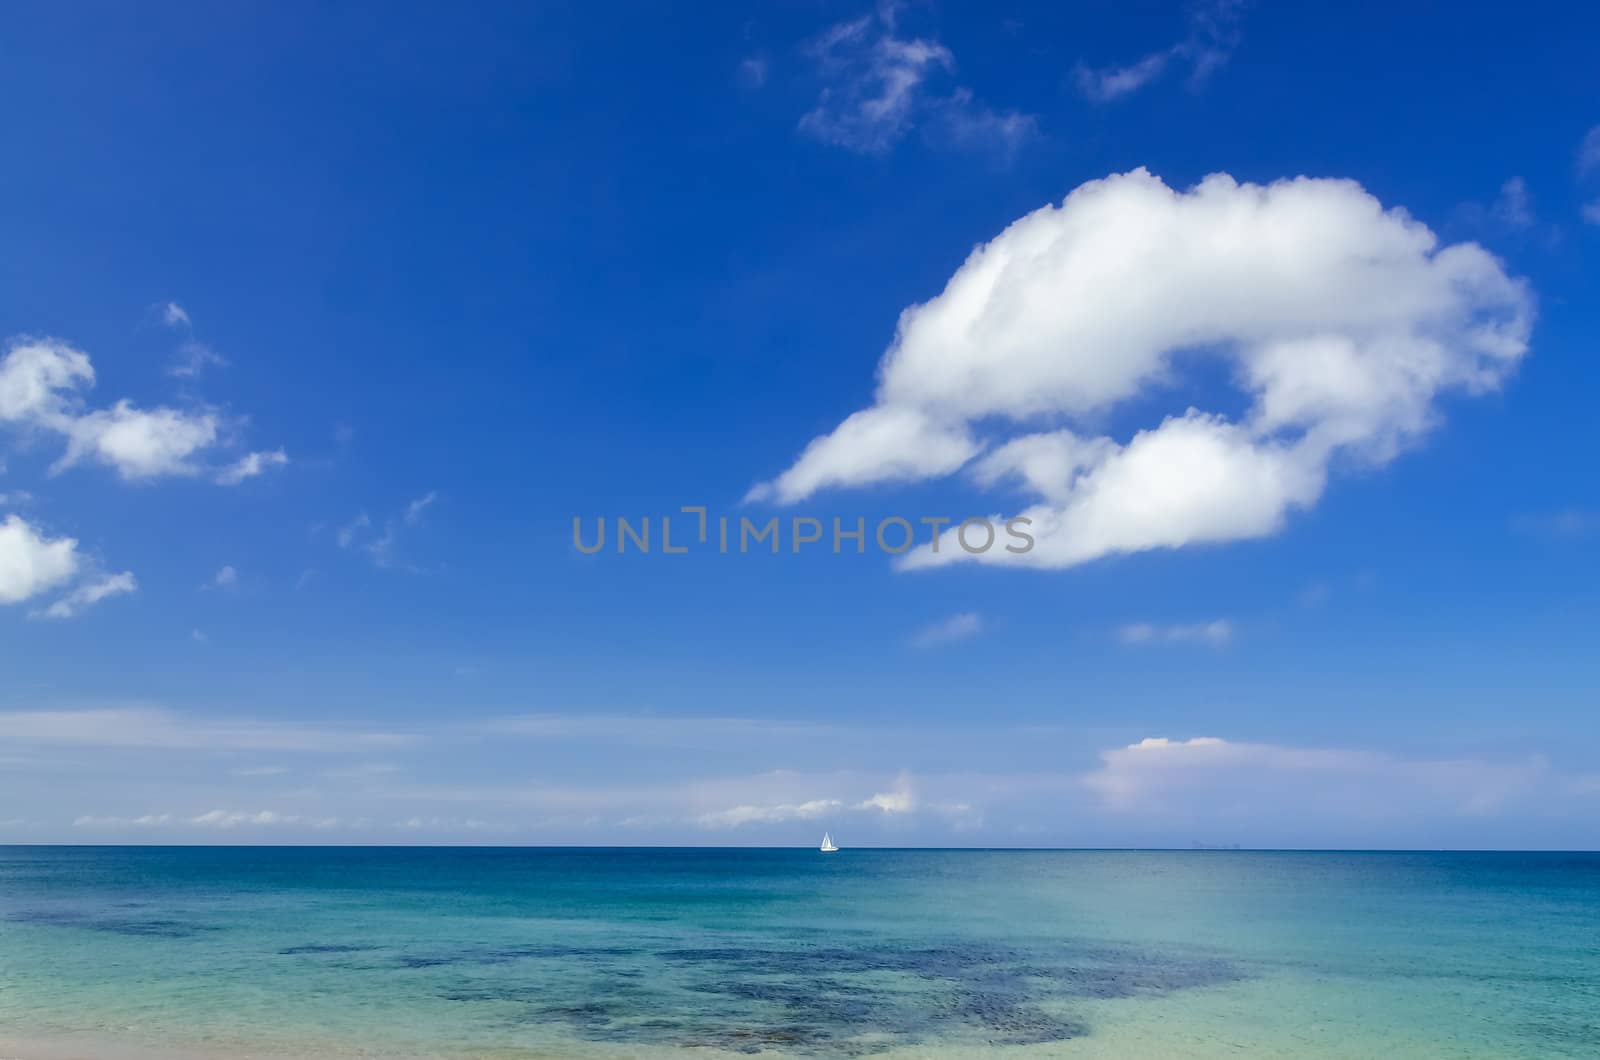 Ocean day landscape with blue cloudy sky and sailboat